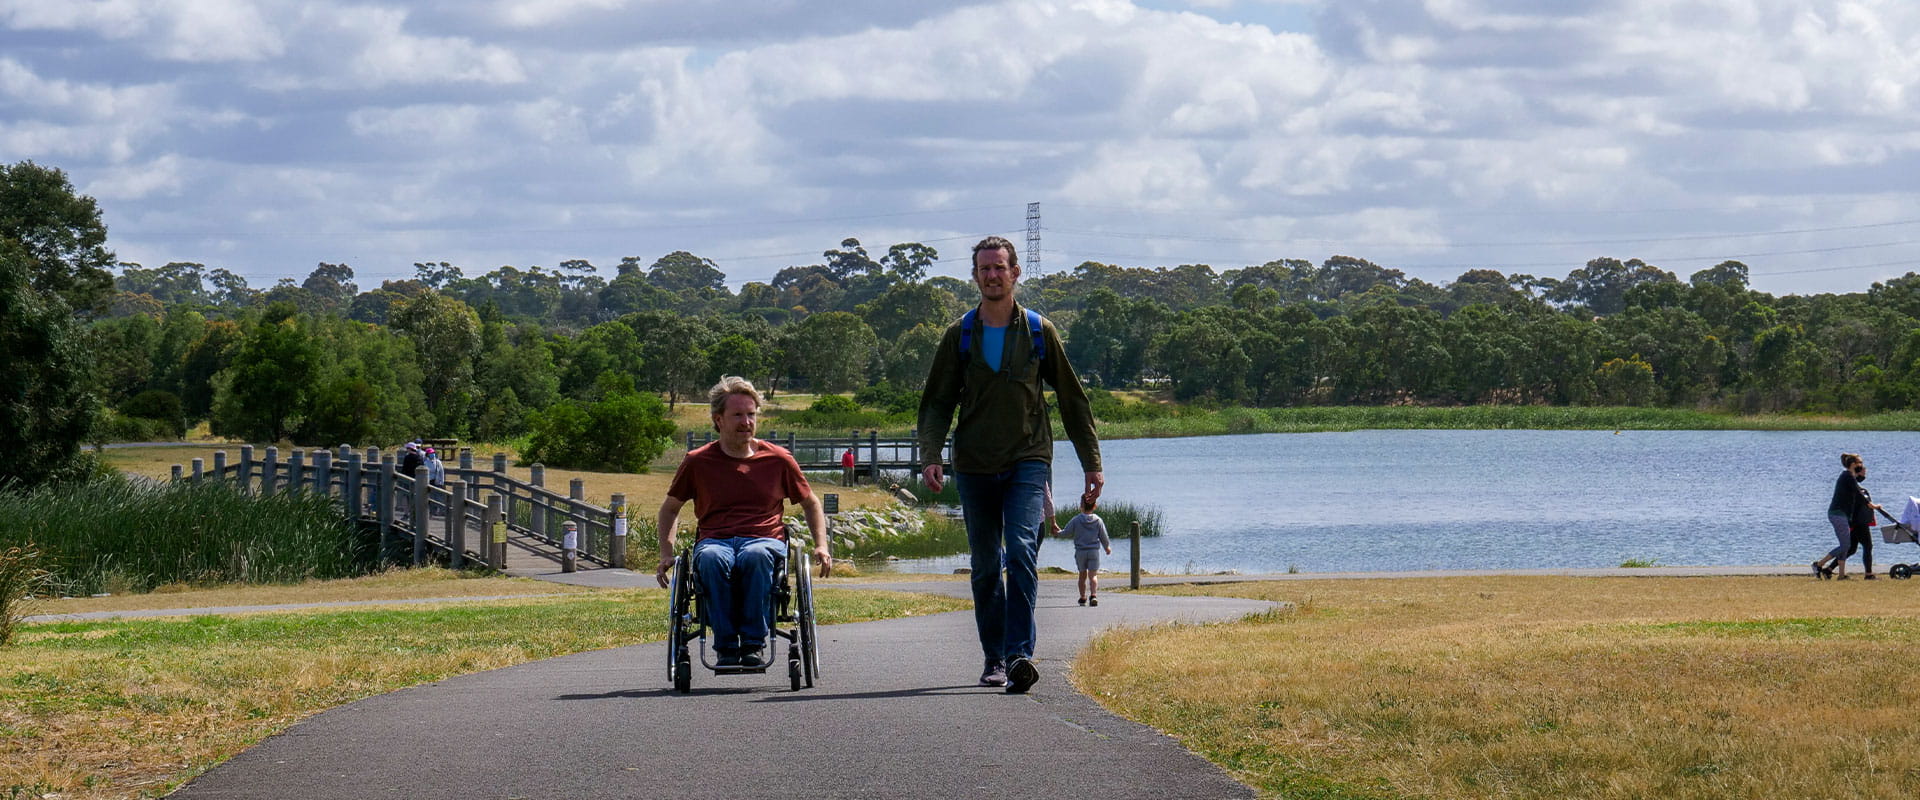 Two men, one of whom is in a wheel chair, walk up a sealed path, away from a lake in the background.